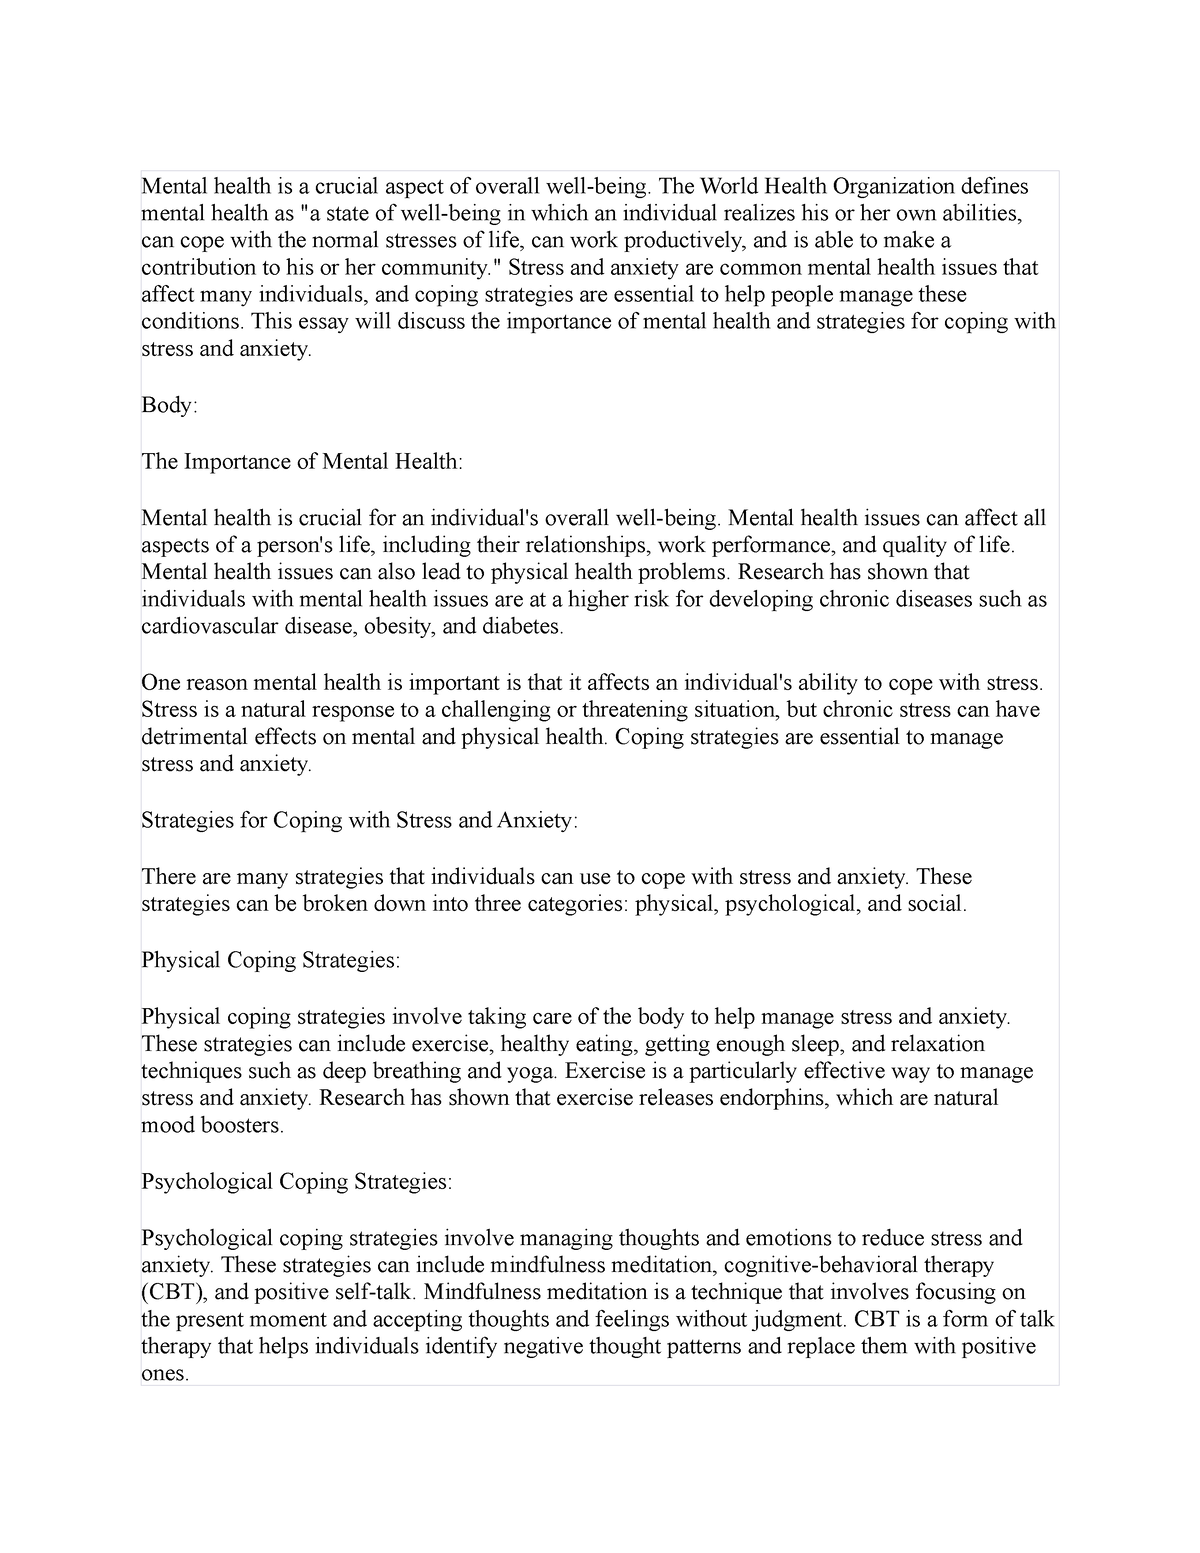 importance of mental health essay 300 words